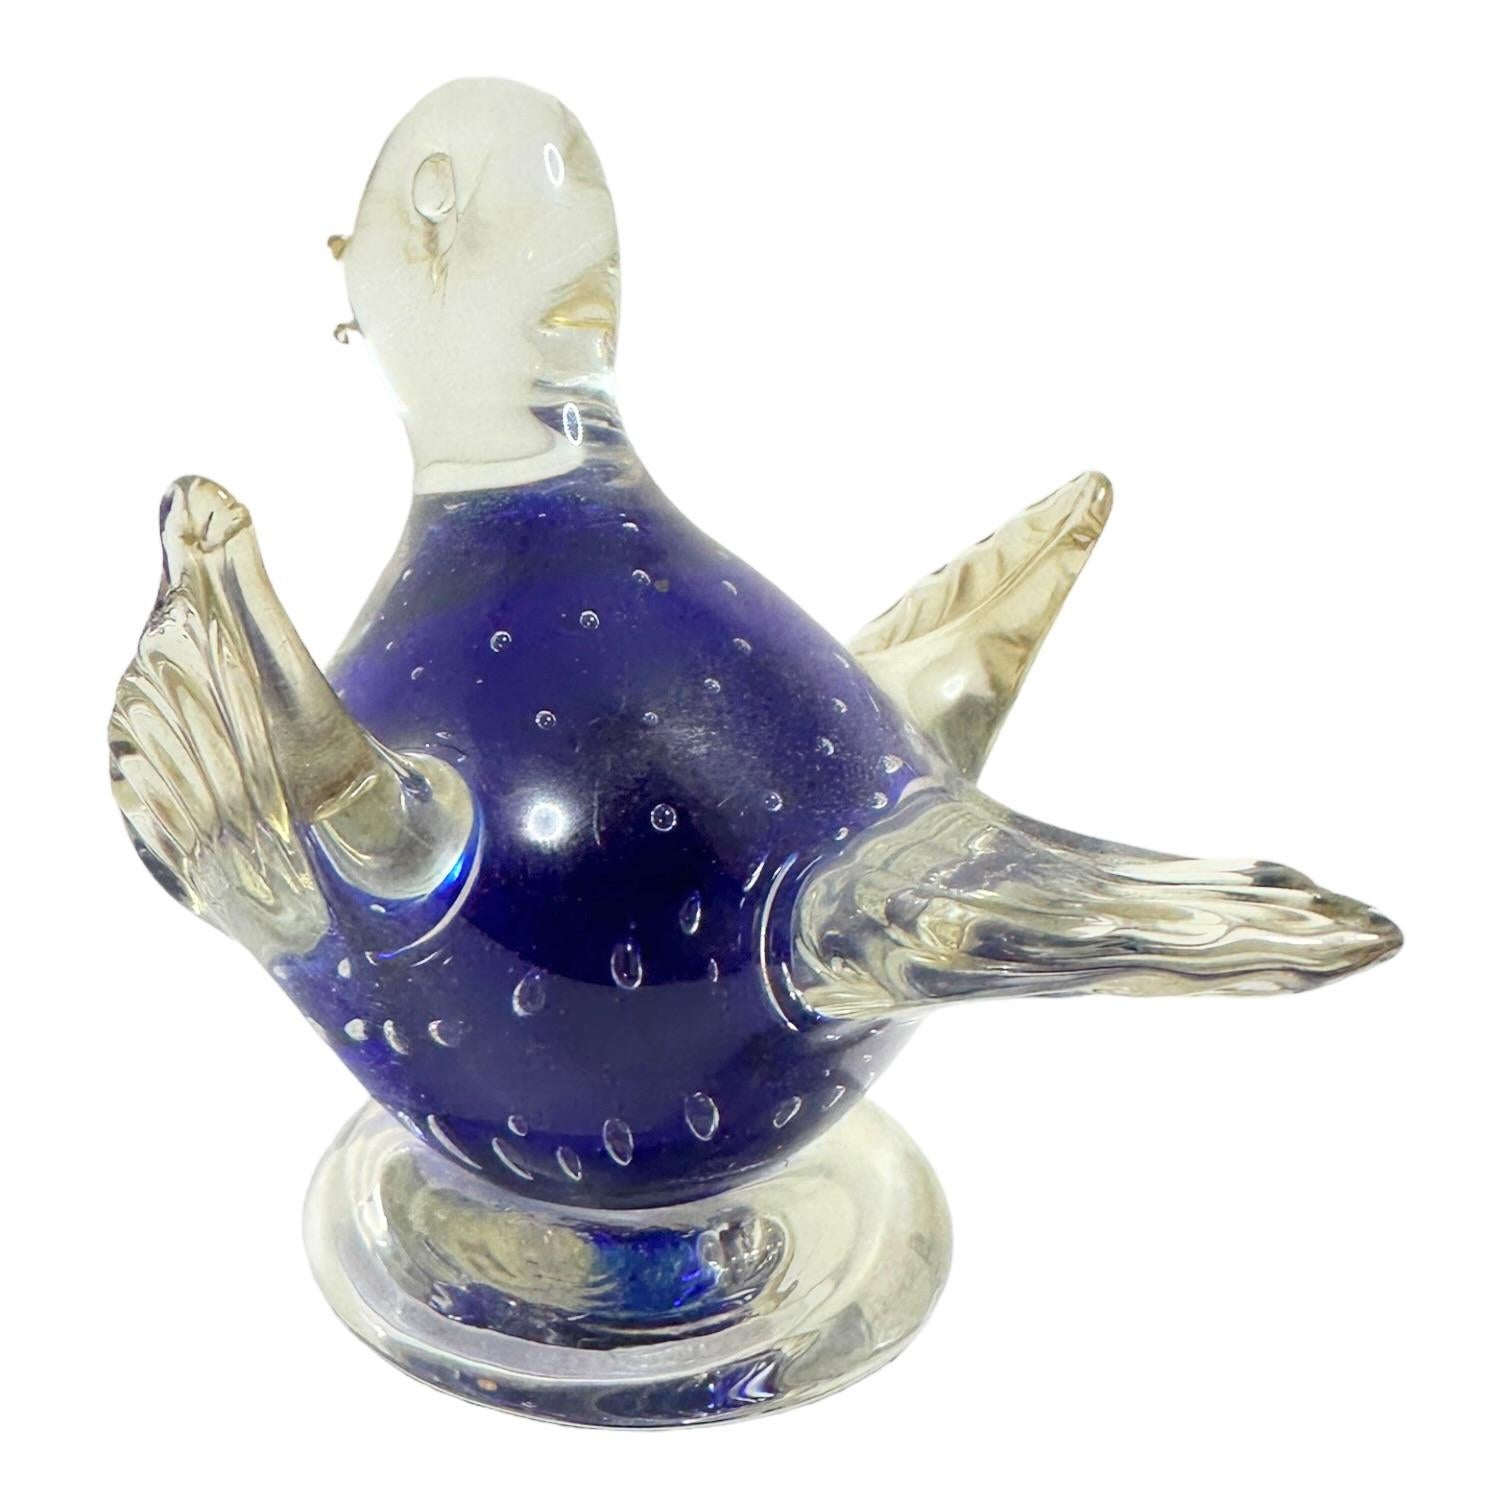 This vintage murano glass paperweight features a delightful sitting bird design. The clear and blue glass gives the paperweight a charming cuddly appearance. This Italian original is a perfect addition to any collection of decorative glassware, and